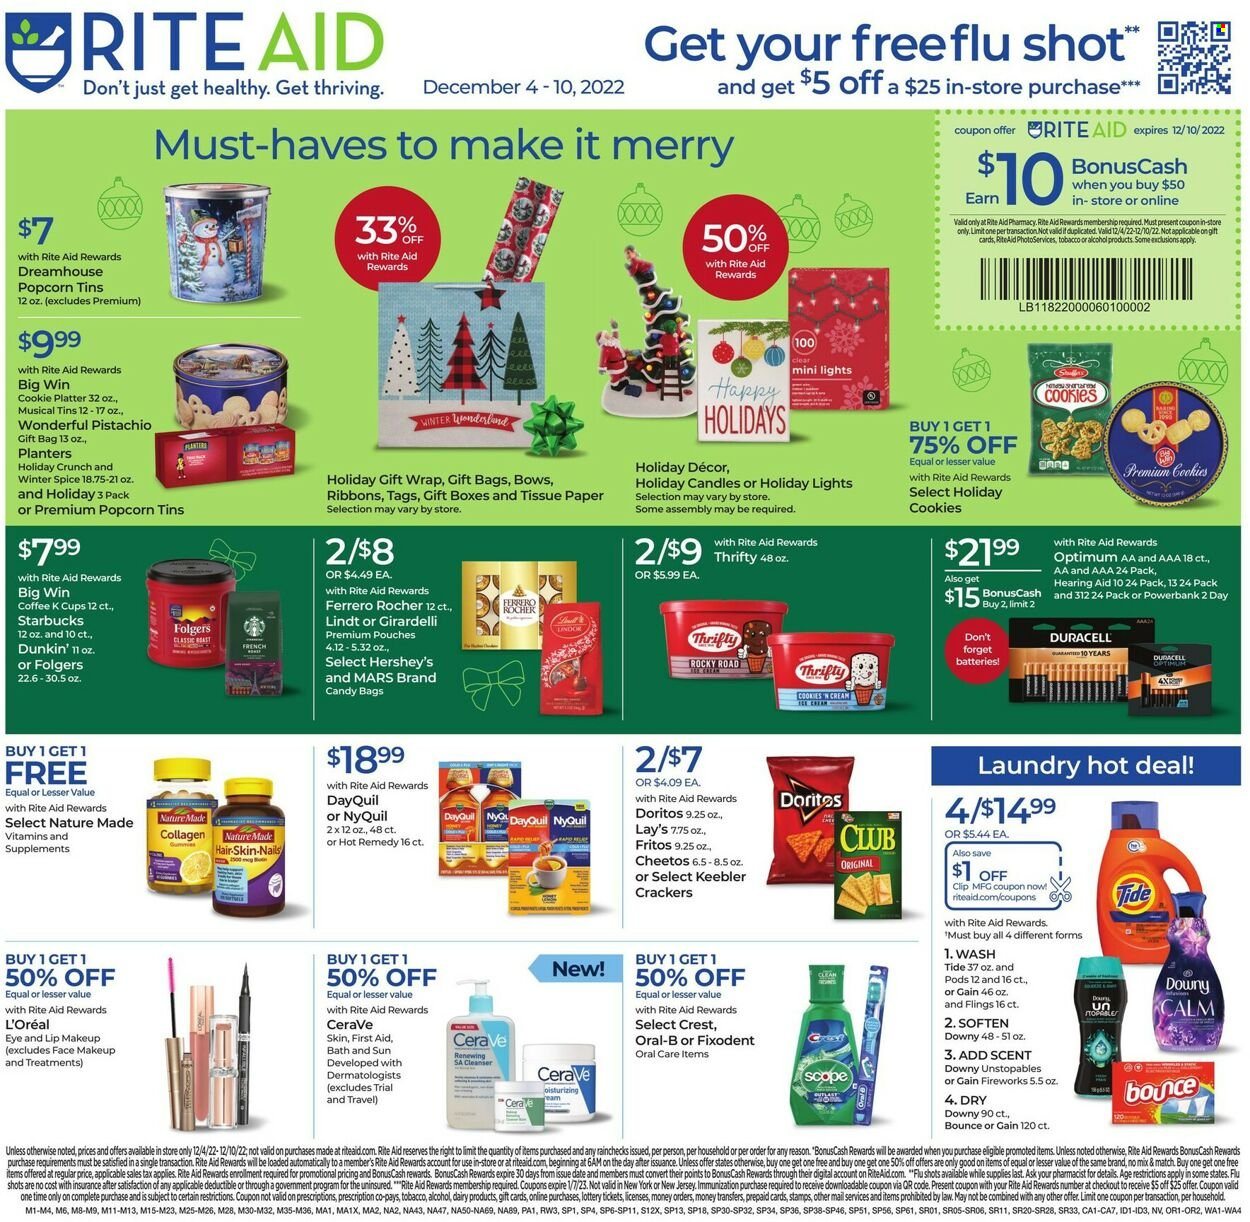 thumbnail - RITE AID Flyer - 12/04/2022 - 12/10/2022 - Sales products - Hershey's, cookies, Lindt, Ferrero Rocher, Mars, crackers, Keebler, Doritos, Fritos, Cheetos, Lay’s, popcorn, spice, Planters, coffee, Starbucks, Folgers, coffee capsules, K-Cups, alcohol, toilet paper, tissues, Gain, Tide, Unstopables, Gain Fireworks, Oral-B, Fixodent, Crest, CeraVe, cleanser, L’Oréal, makeup, cup, candle, Duracell, Optimum, DayQuil, Nature Made, NyQuil. Page 1.